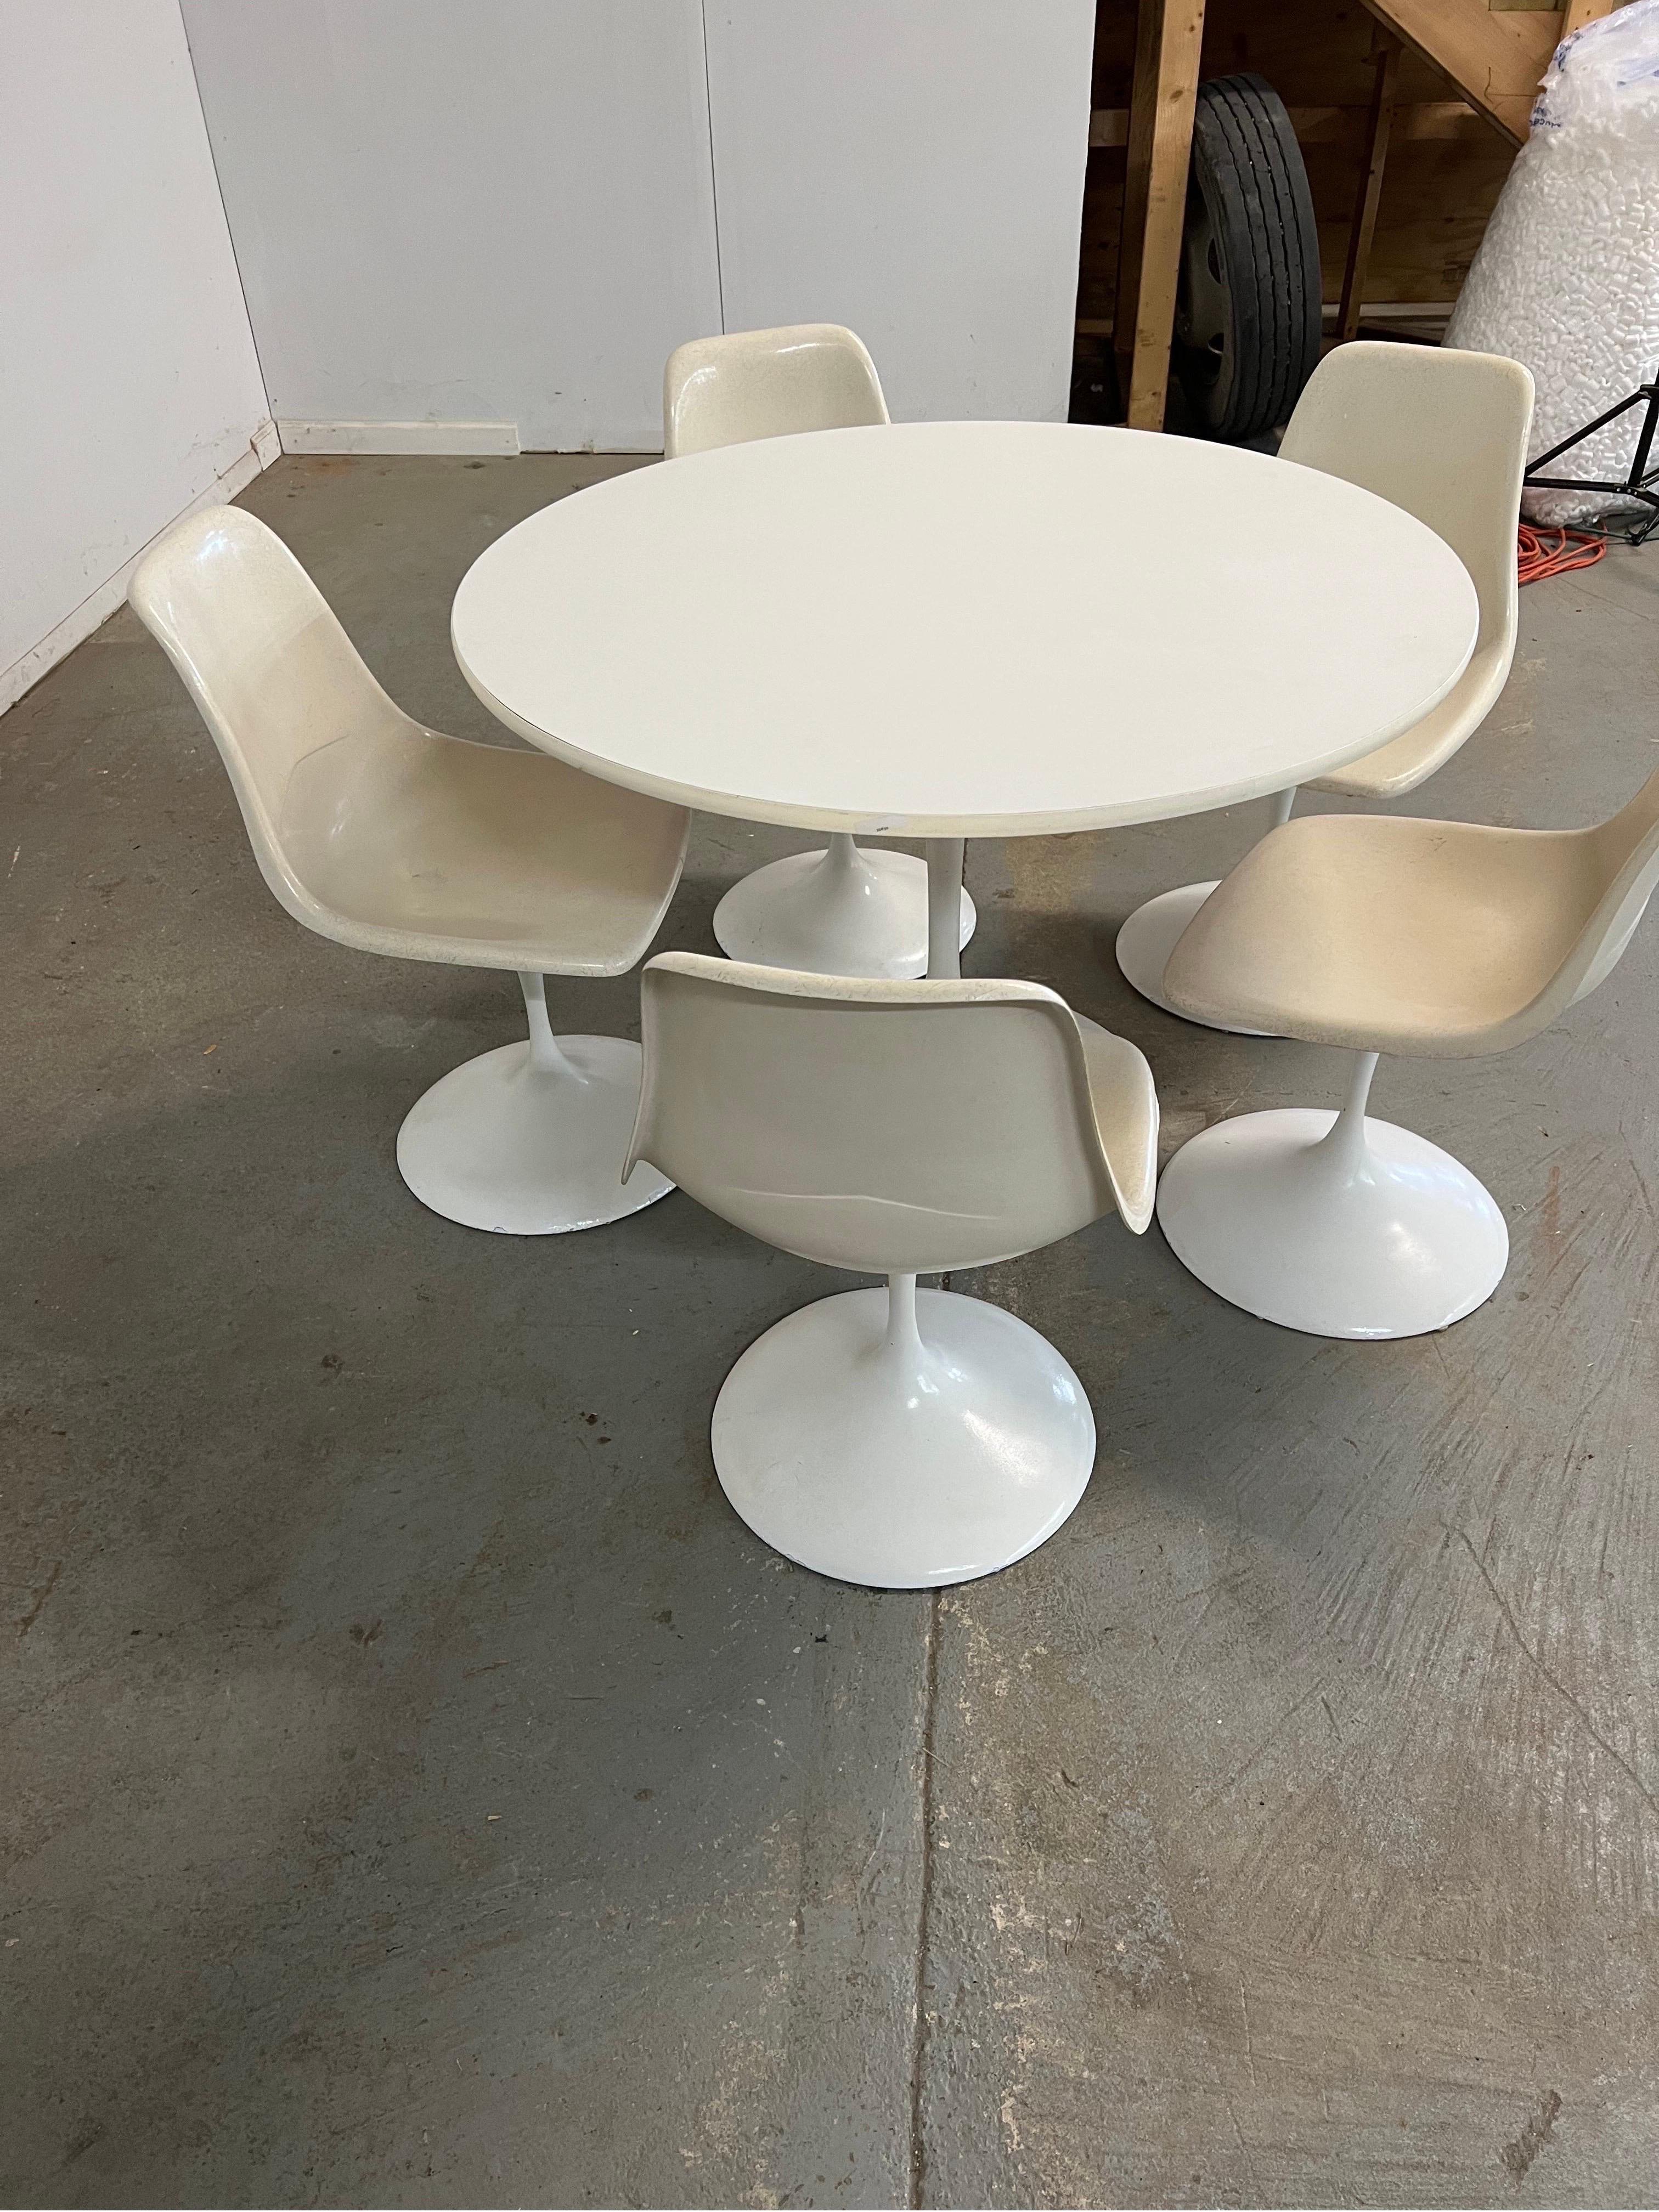 American Mid-Century Modern Eero Saarinen Style Tulip Round Dining Table and Chairs For Sale